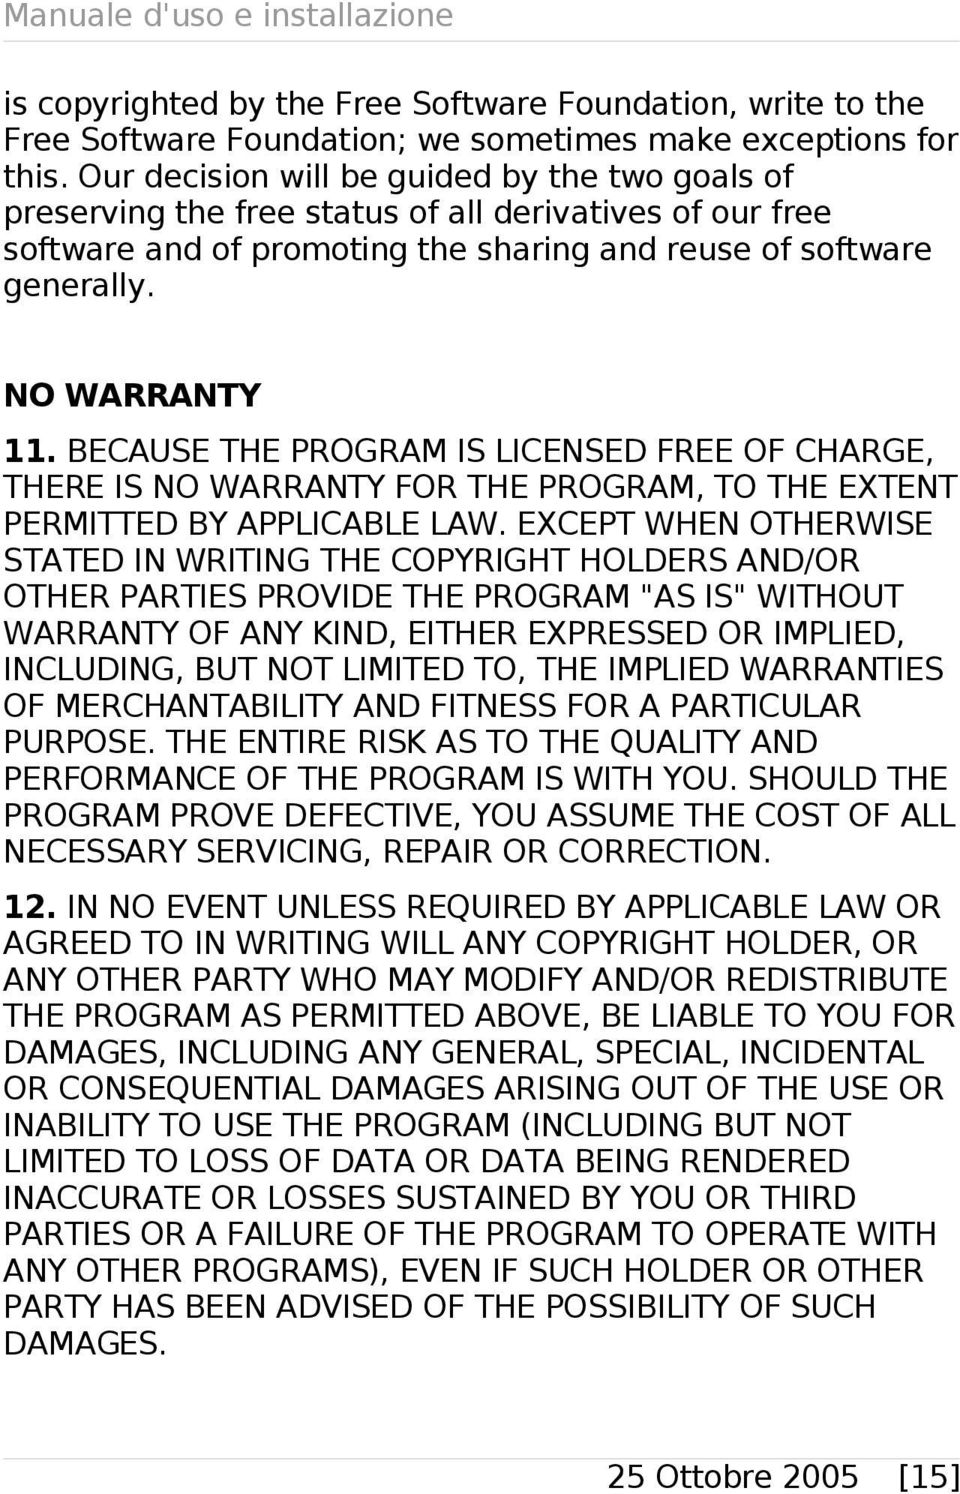 BECAUSE THE PROGRAM IS LICENSED FREE OF CHARGE, THERE IS NO WARRANTY FOR THE PROGRAM, TO THE EXTENT PERMITTED BY APPLICABLE LAW.